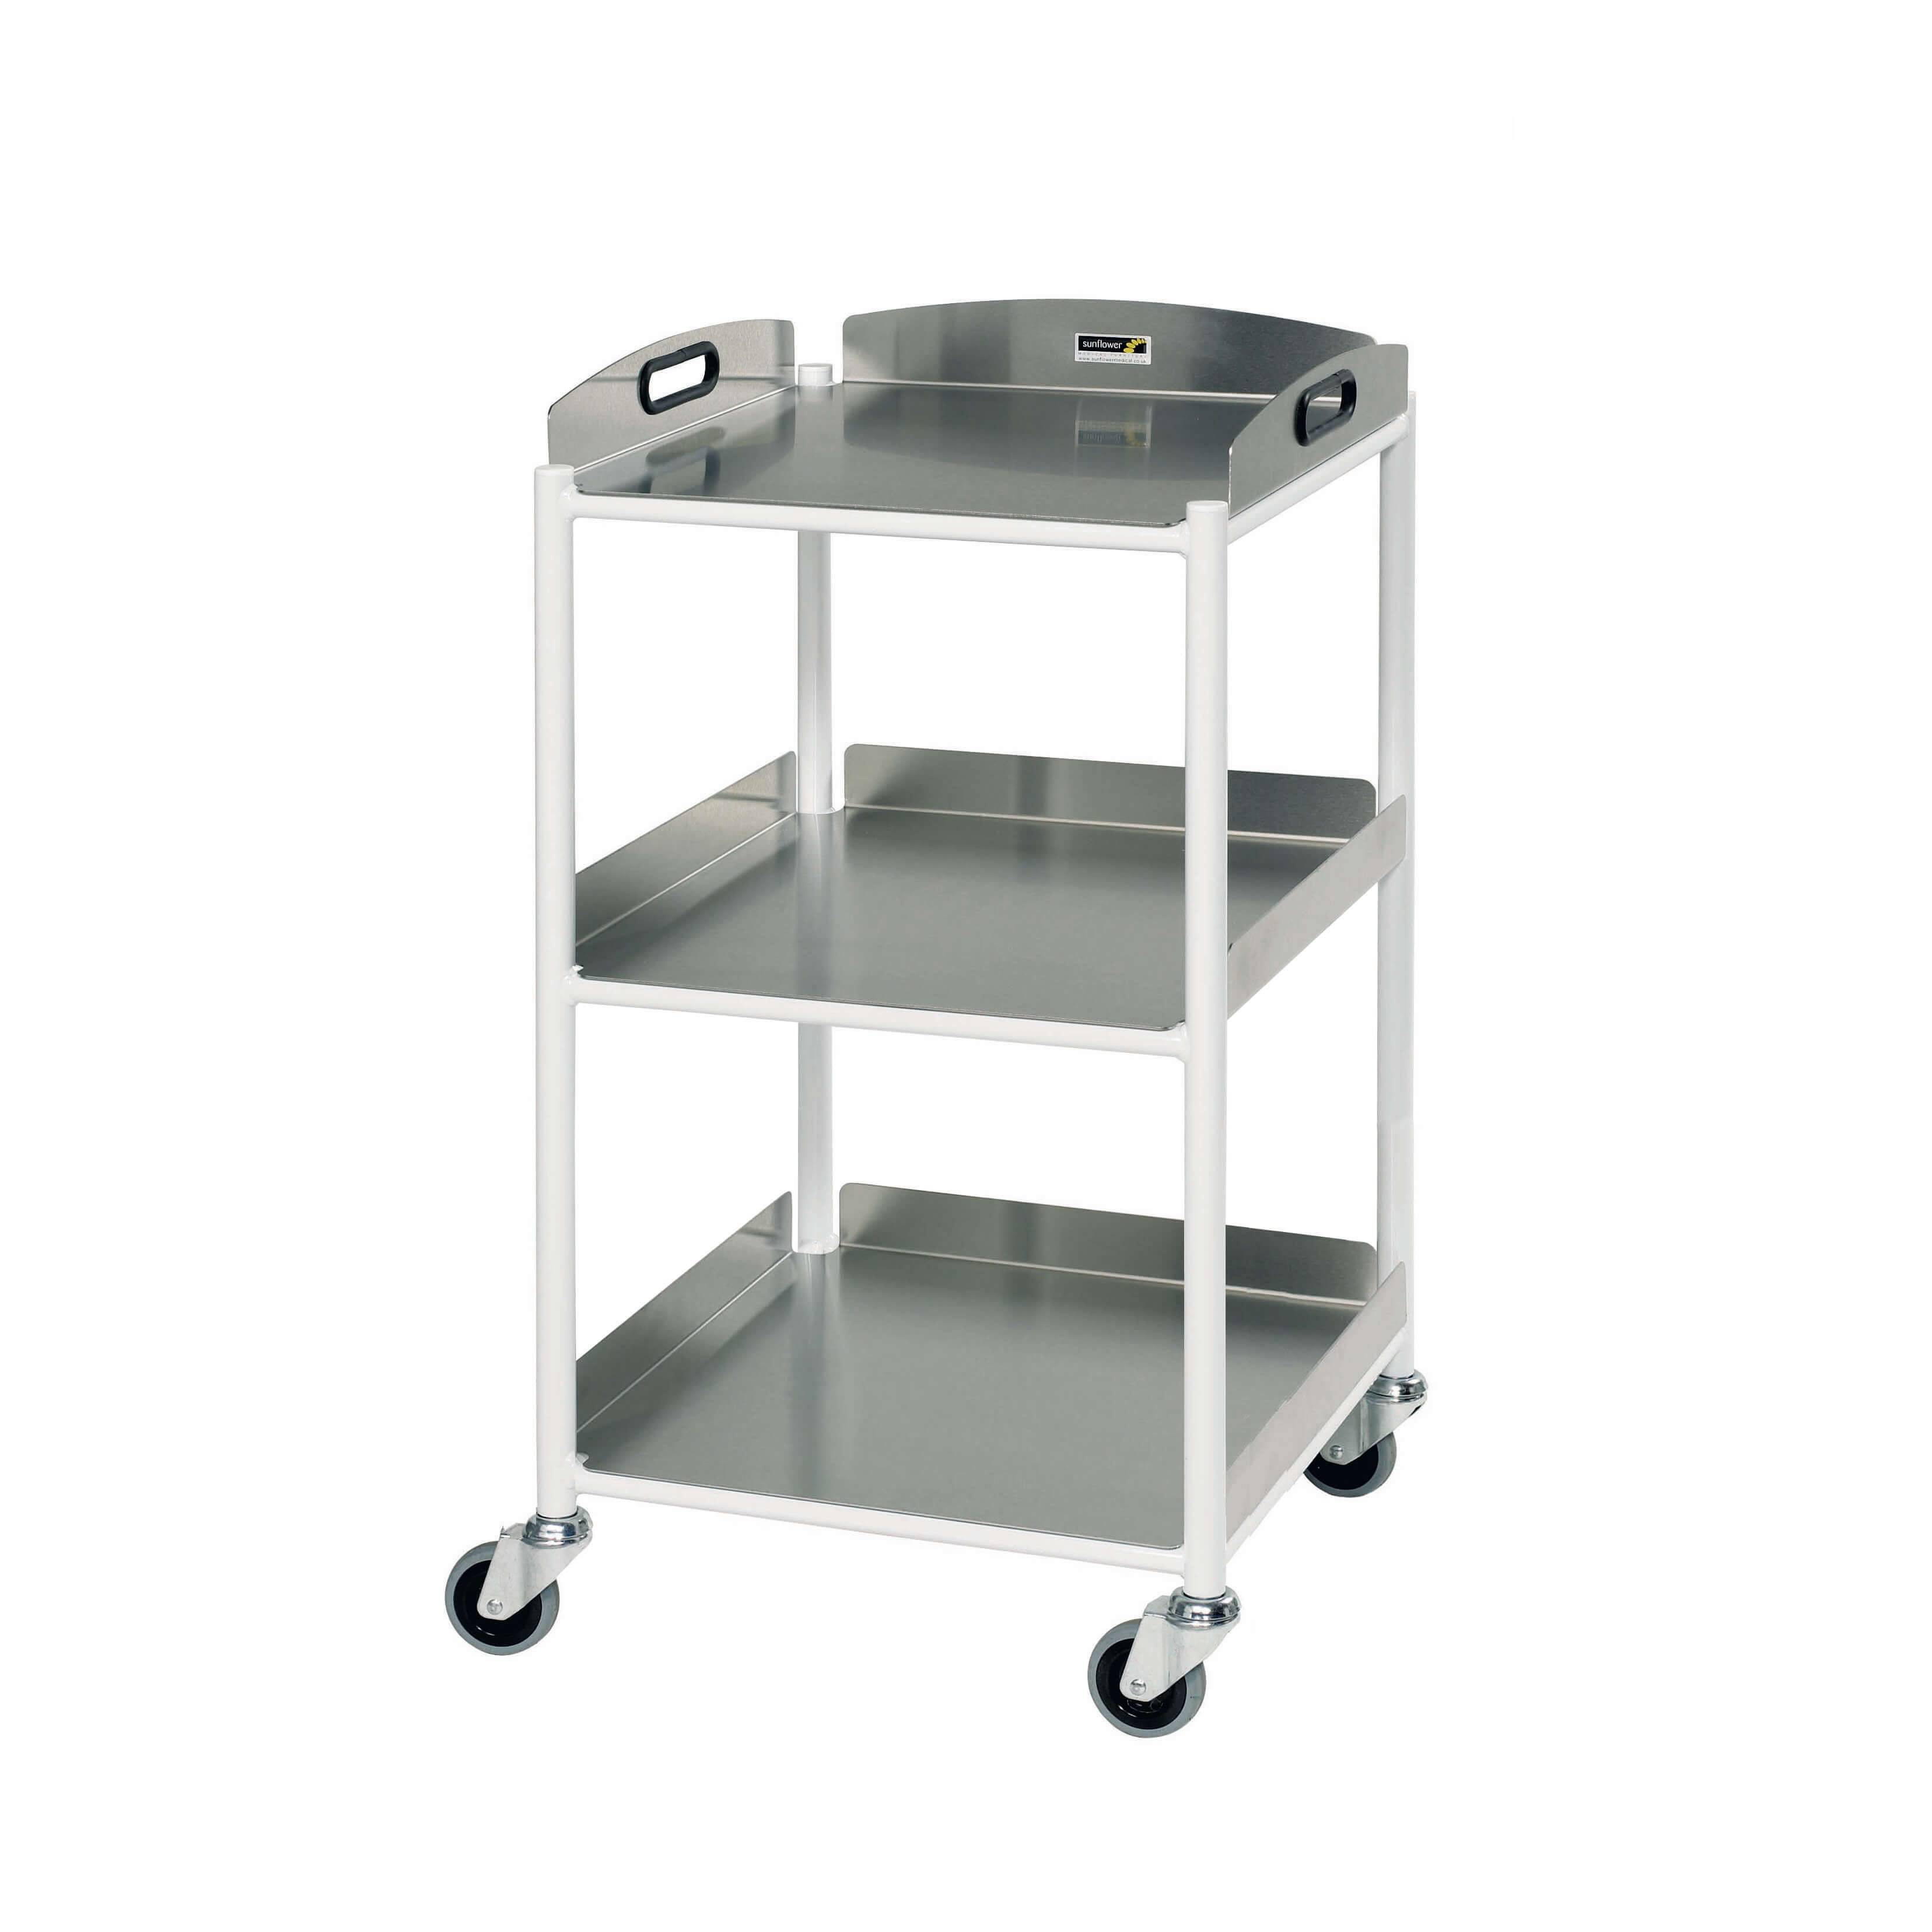 Dressing Trolley, 3 Stainless Steel Trays [Sun-DT4S3]